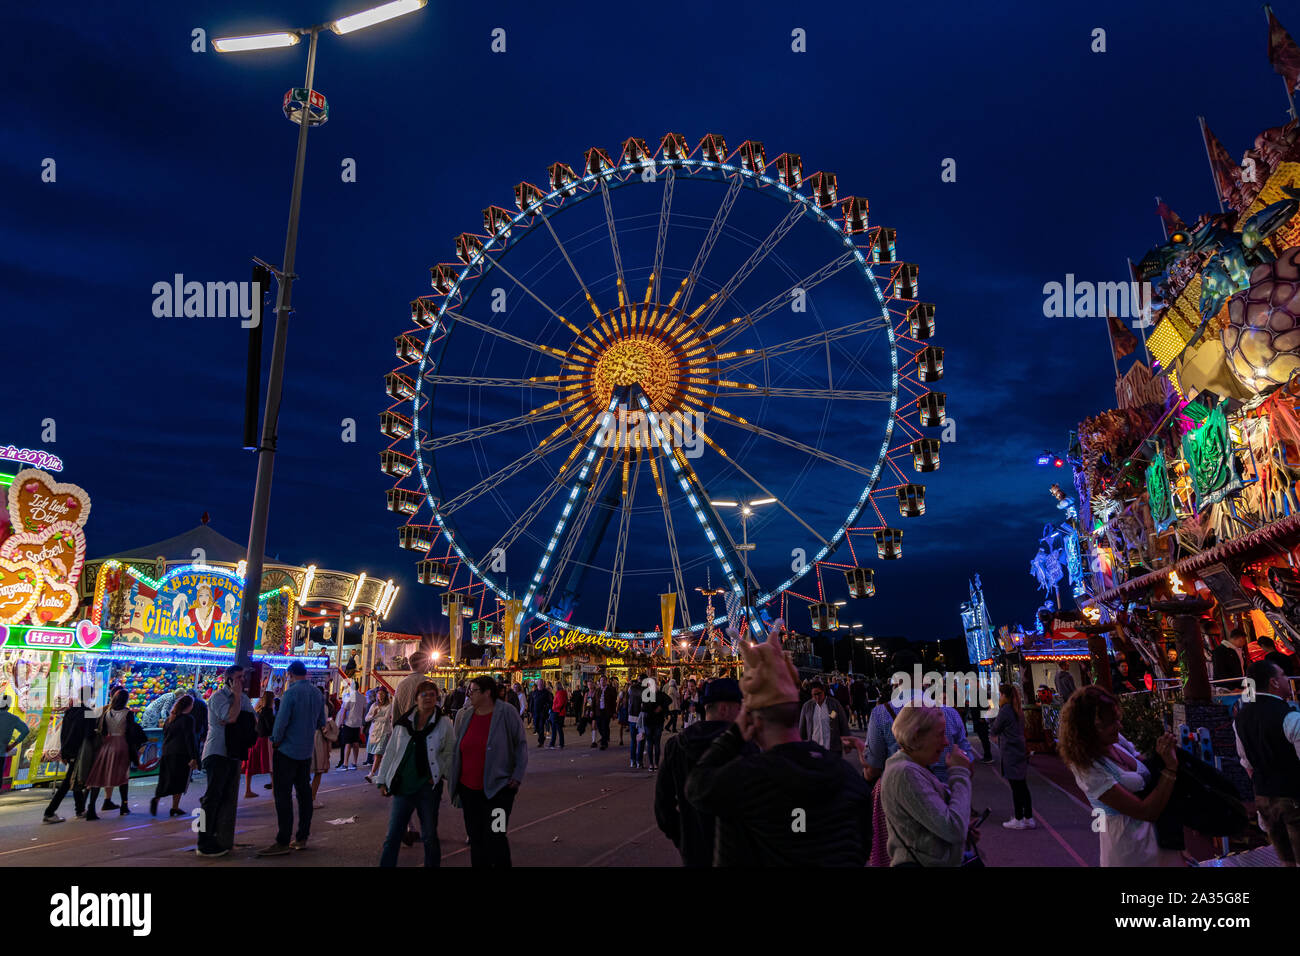 Munich, Germany - 2019, September 28: visitors from all over the world walking in front of the ferris wheel at the Oktoberfest in Munich. Stock Photo